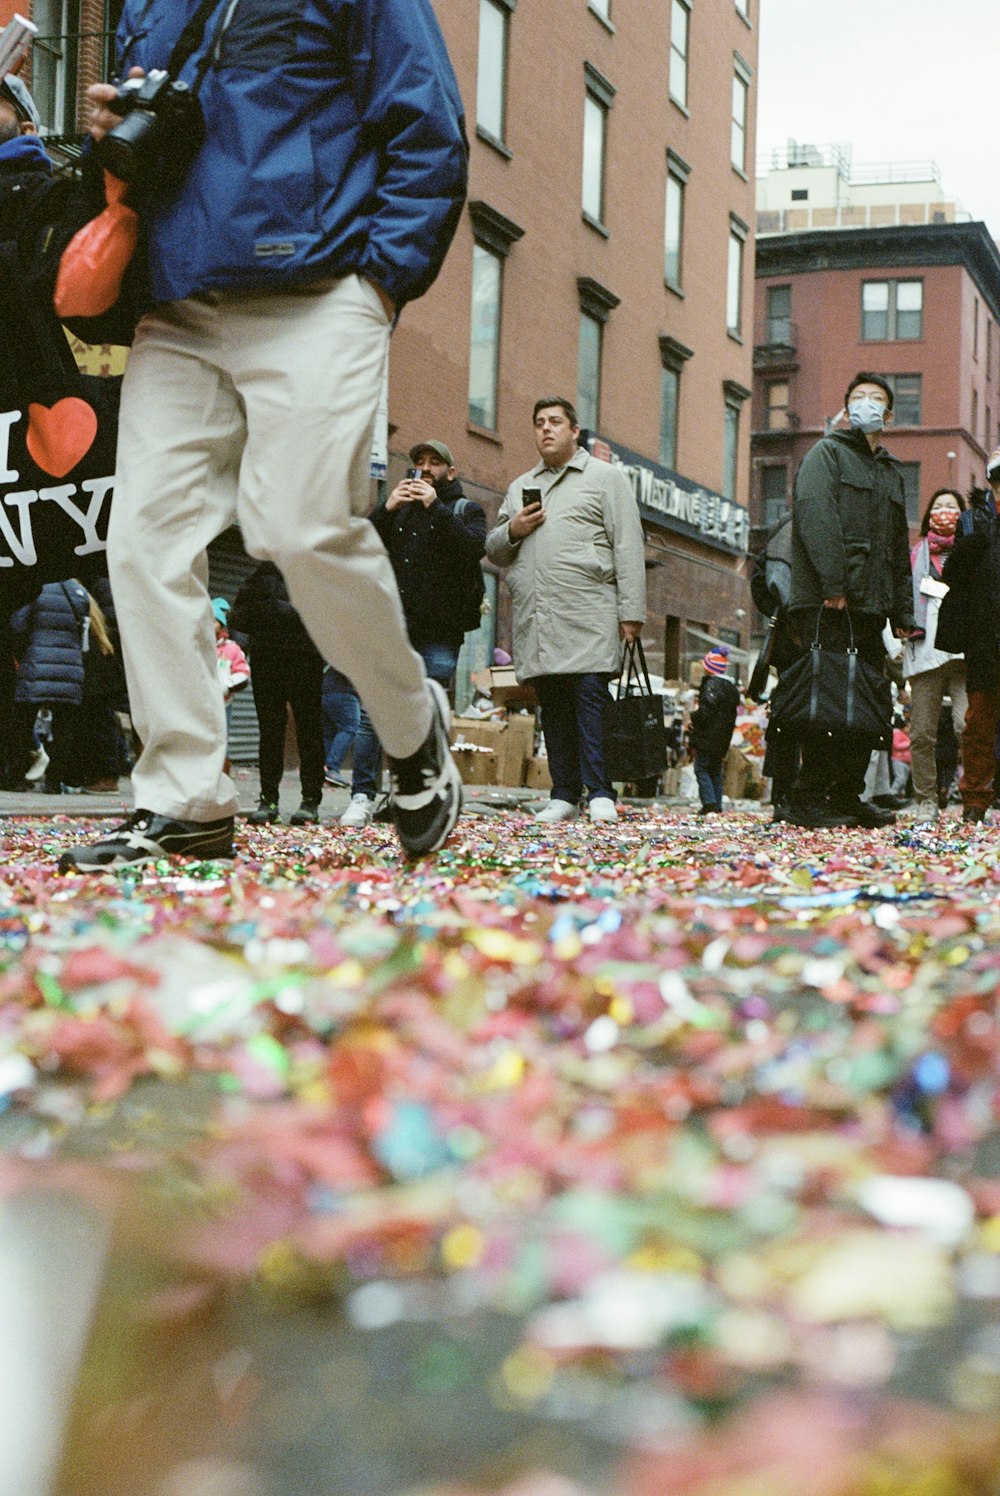 a group of people standing on a street next to a pile of confetti